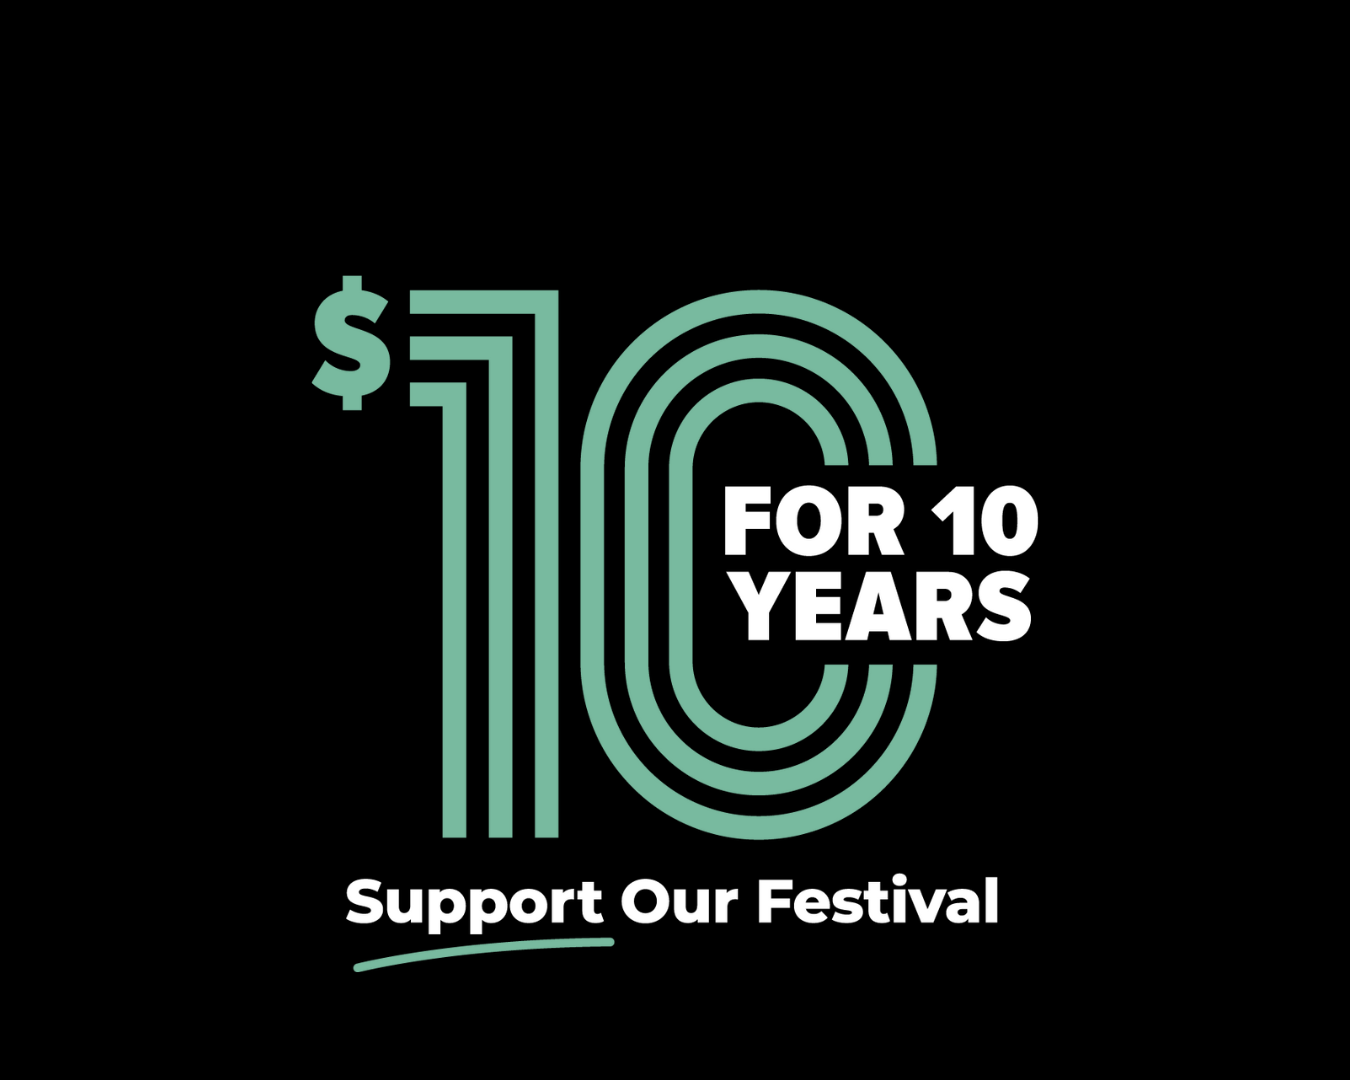 $10 for 10 years. Support our festival.